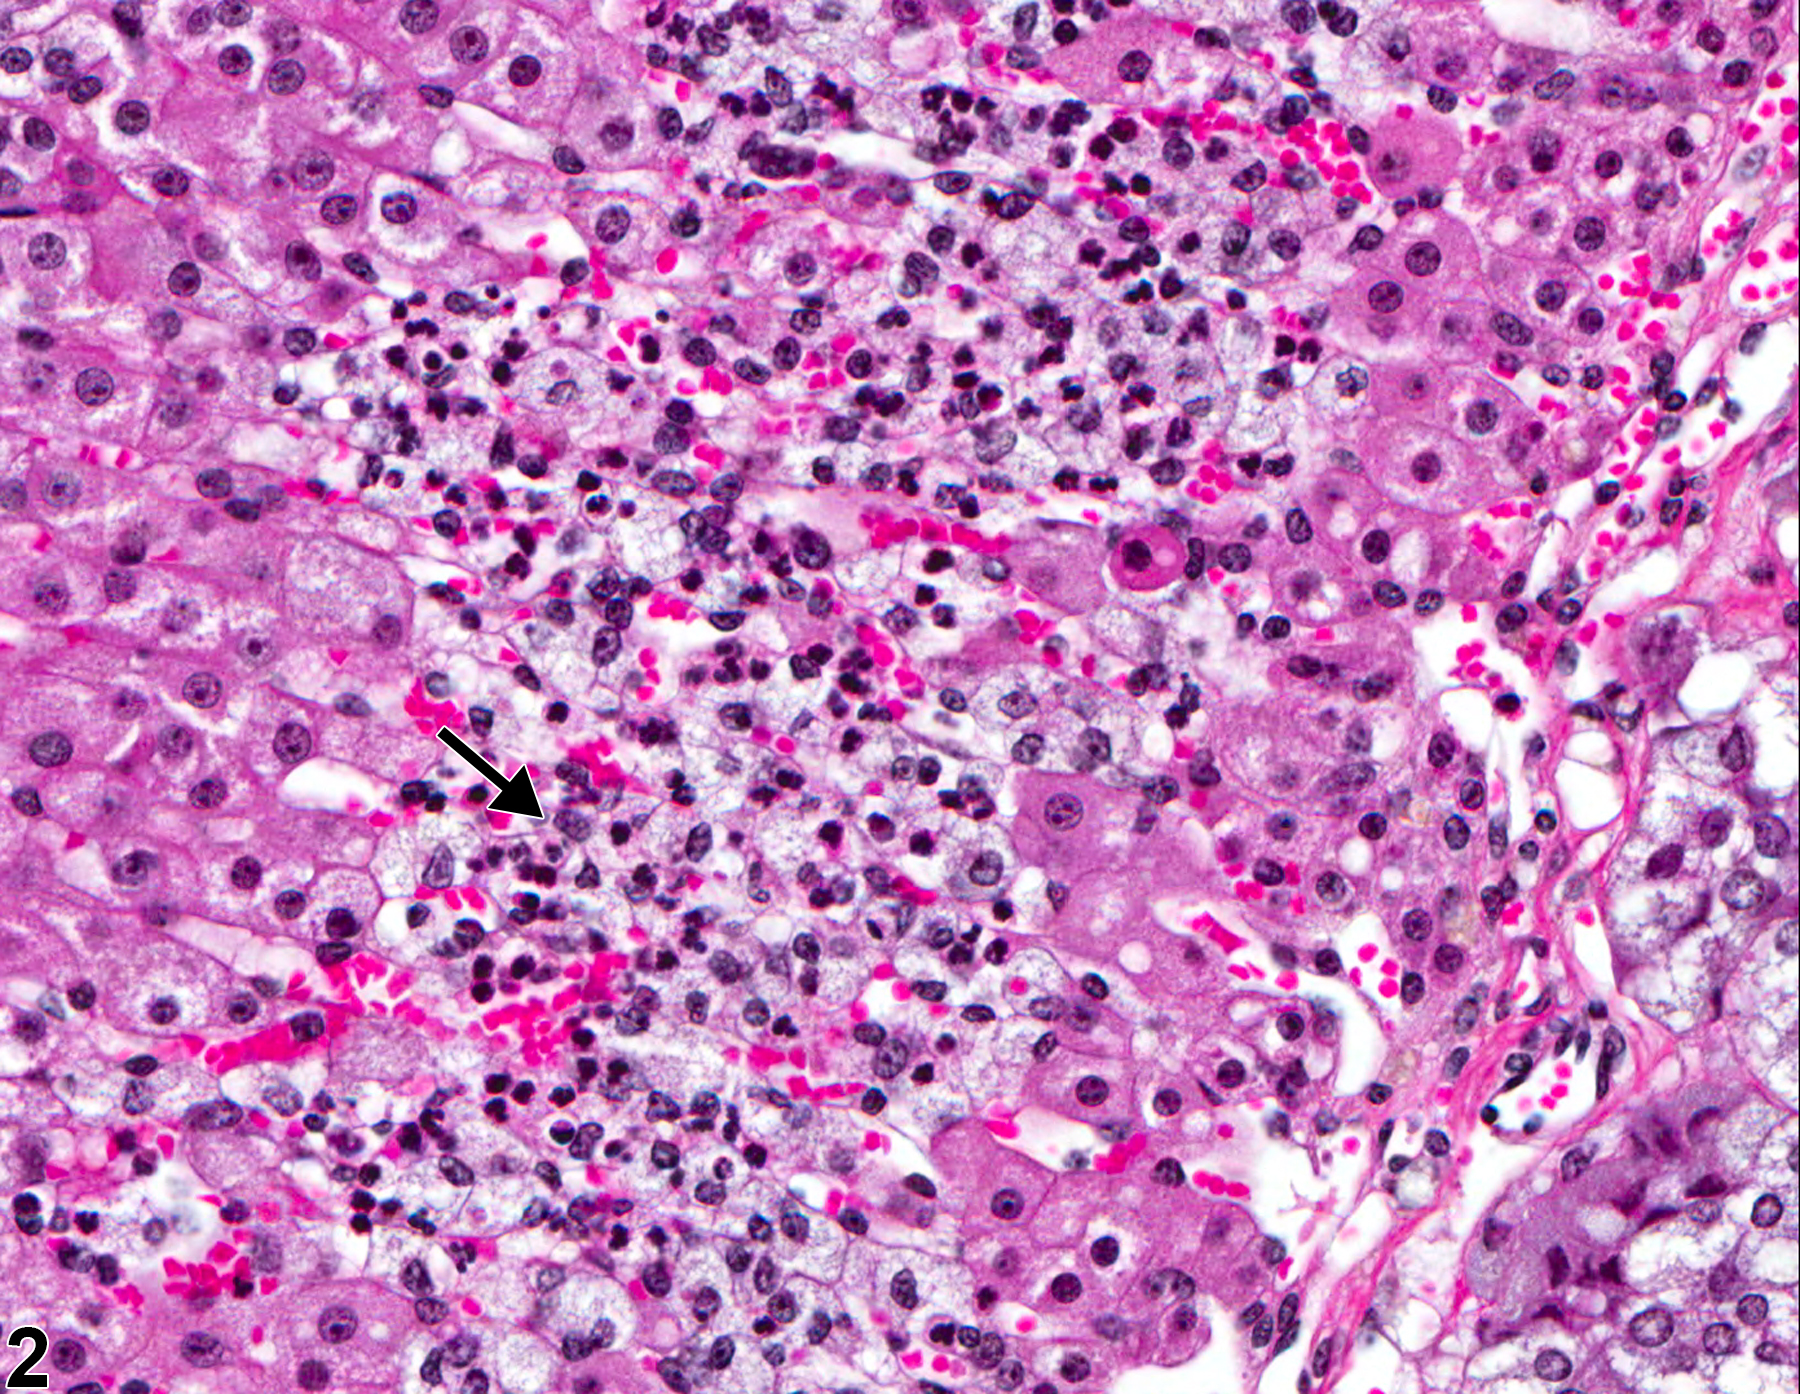 Image of inflammation in the adrenal gland cortex from a female B6C3F1/N mouse in a chronic study